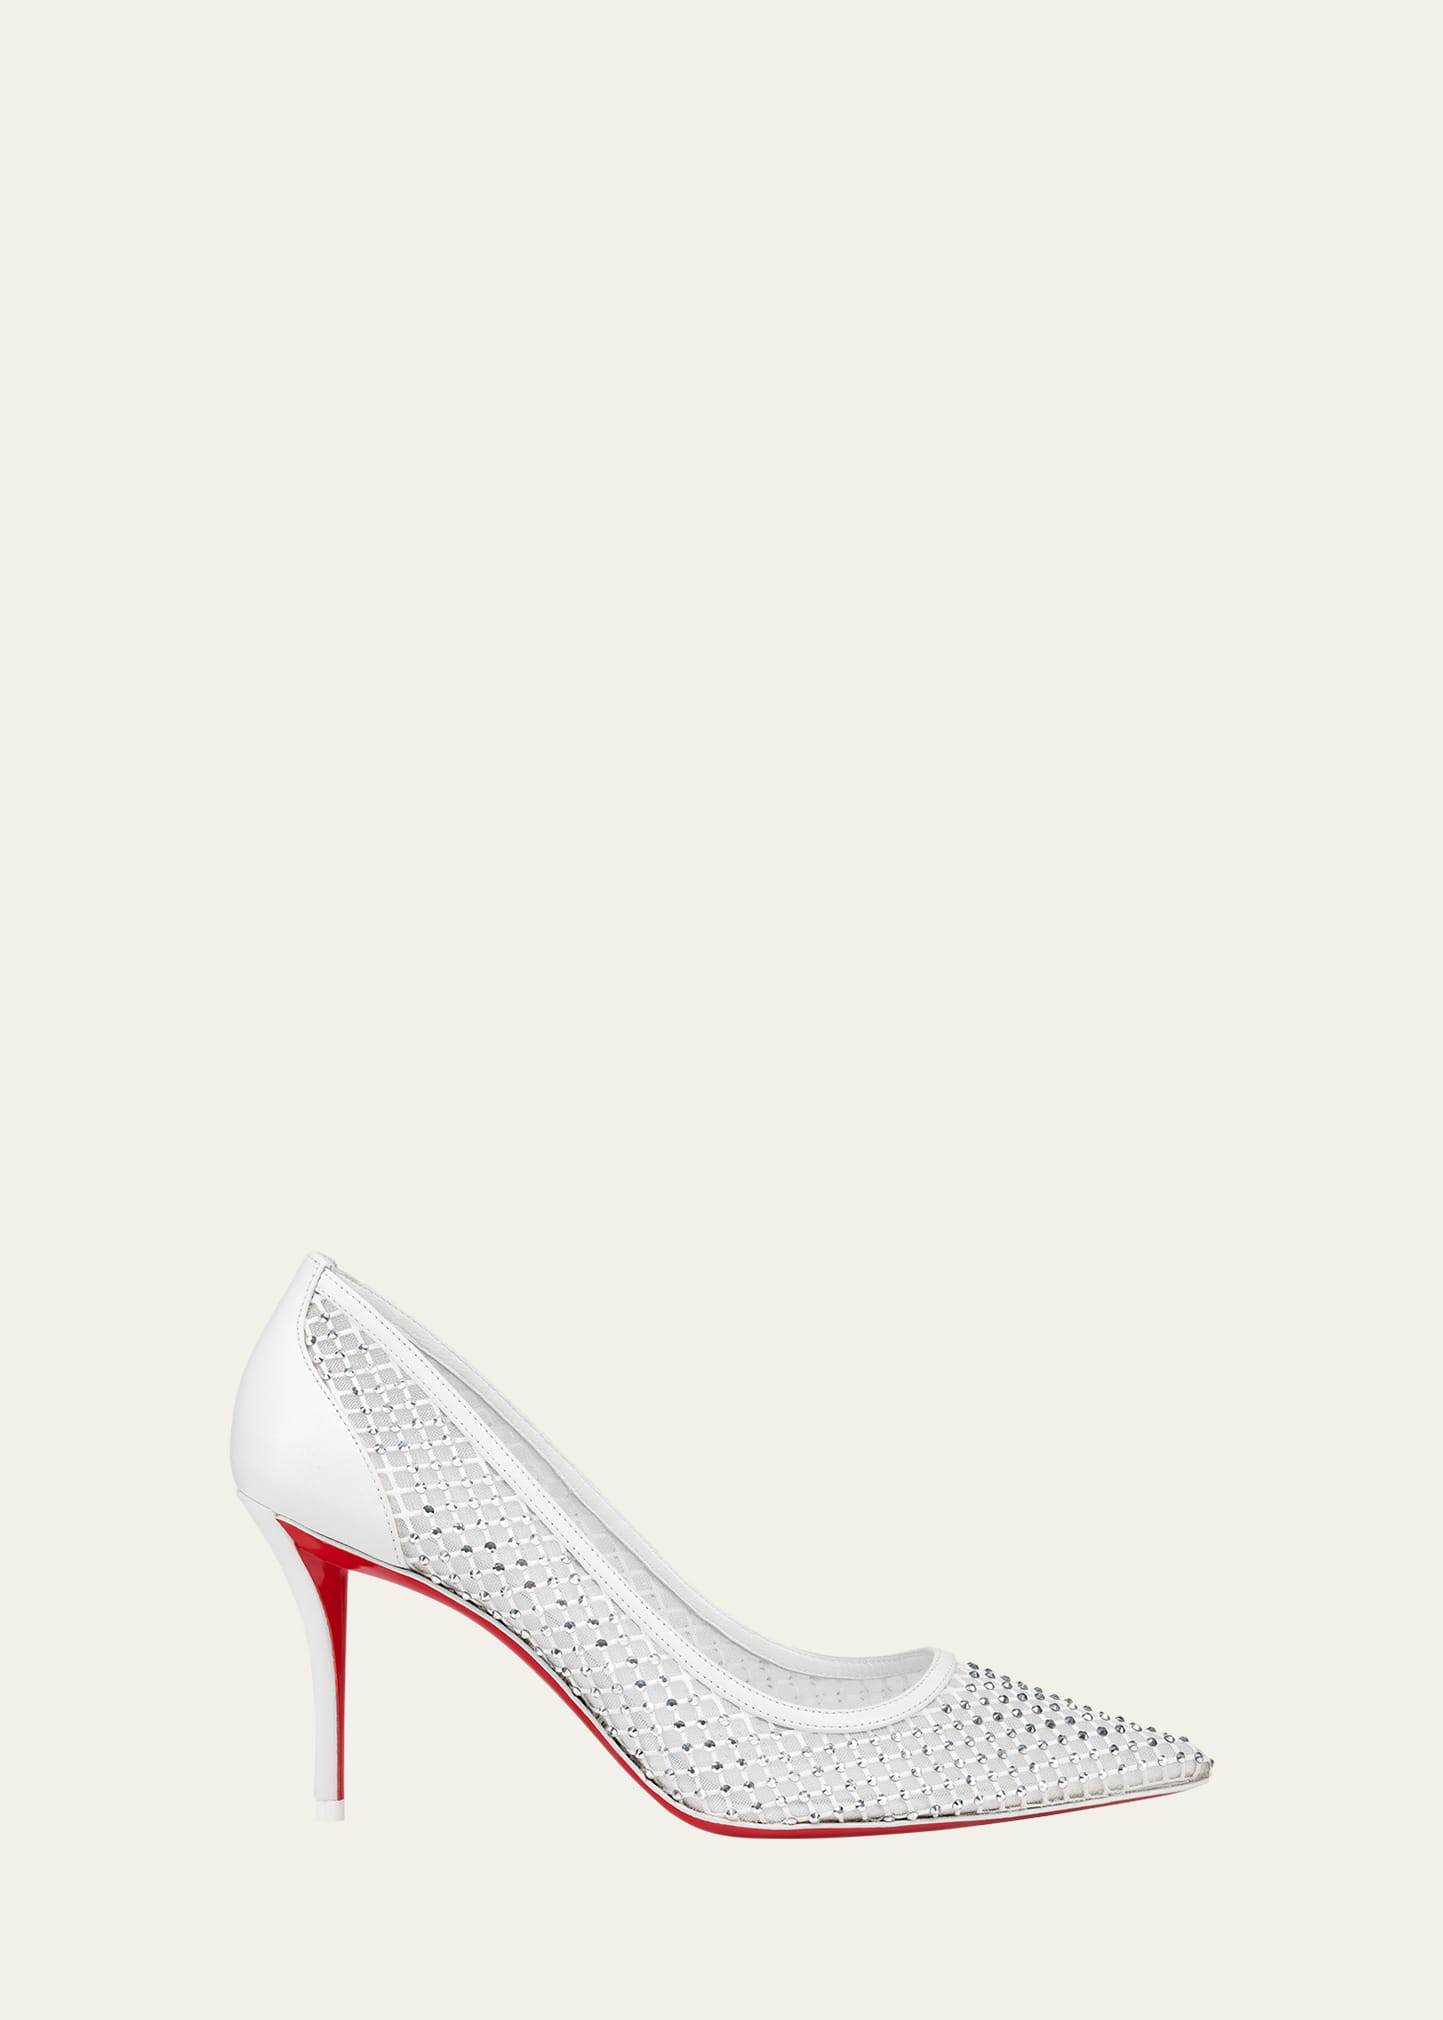 Christian Louboutin Apostropha Mesh Strass Red Sole Pumps In White